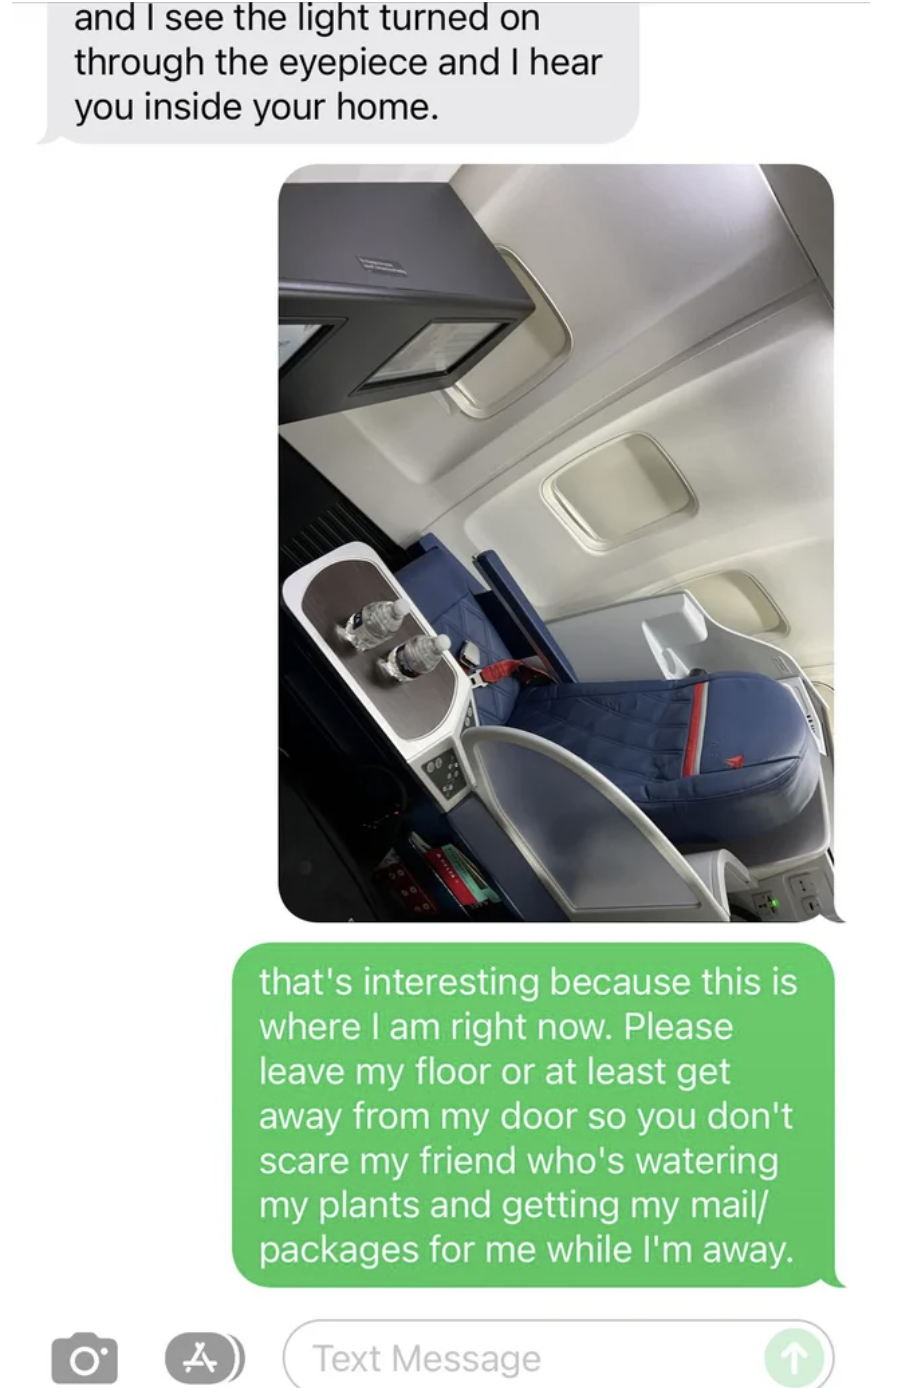 Text exchange ending with, "that's interesting because this is where I am right now. Please leave my floor or at least get away from my door so you don't scare my friend who's watering my plants and getting my mail/packages for me while I'm away."